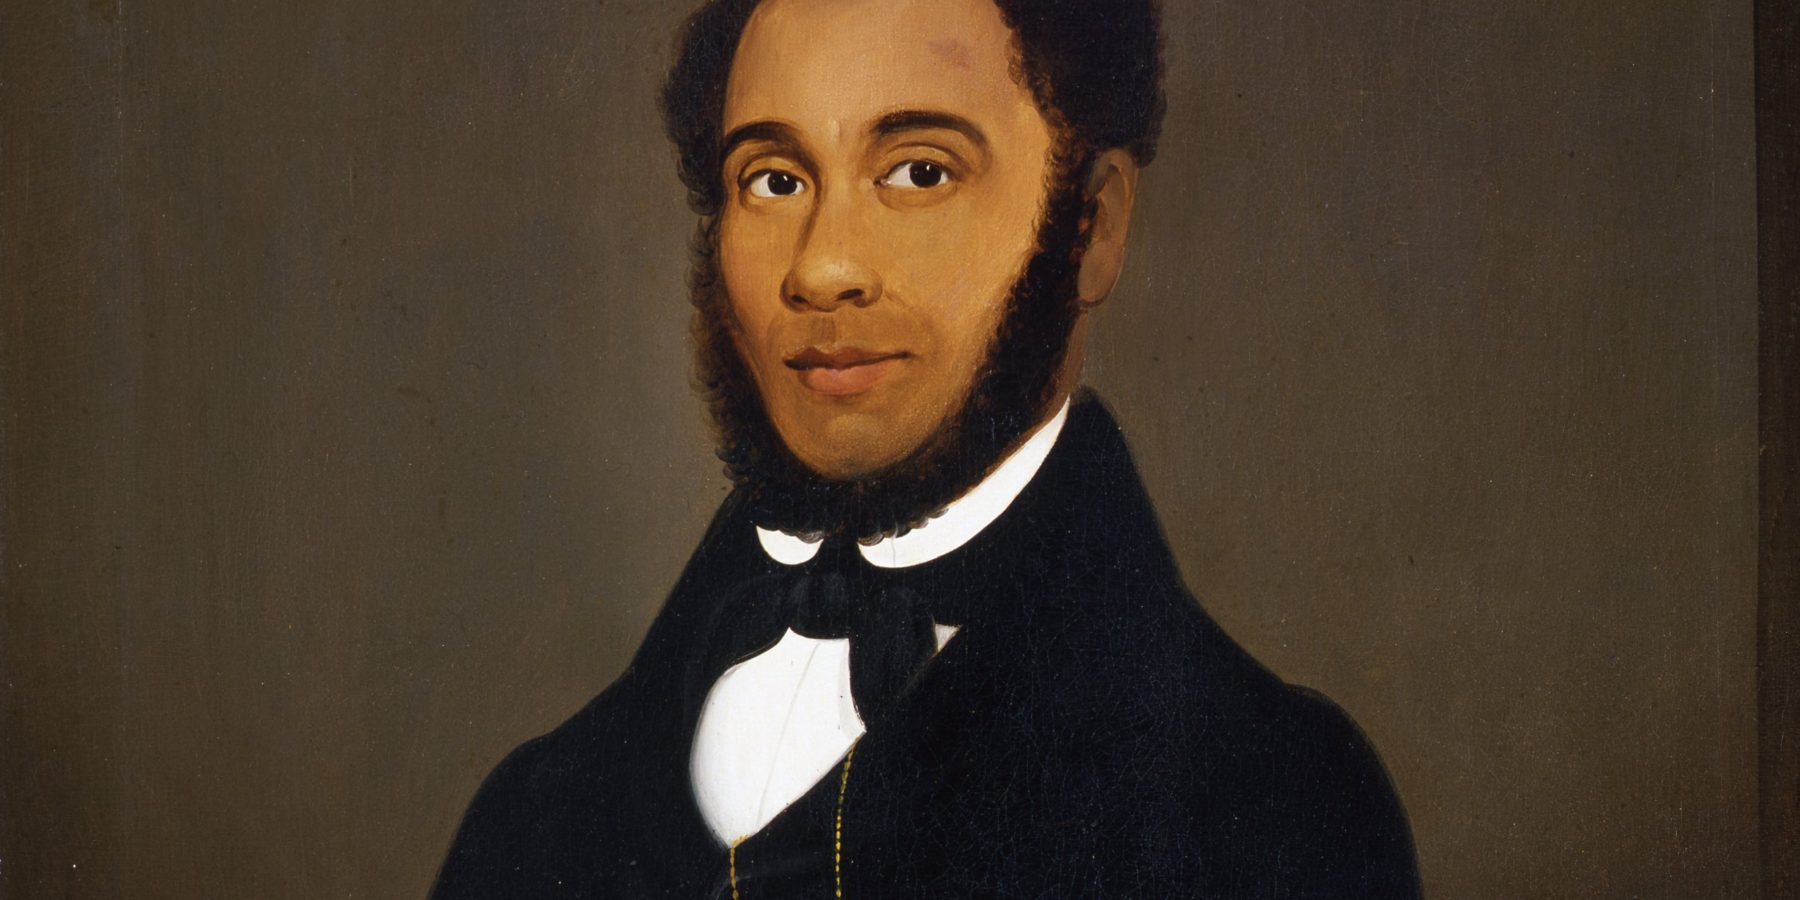 A Look at the Lawsons: 19th Century African American Portraits